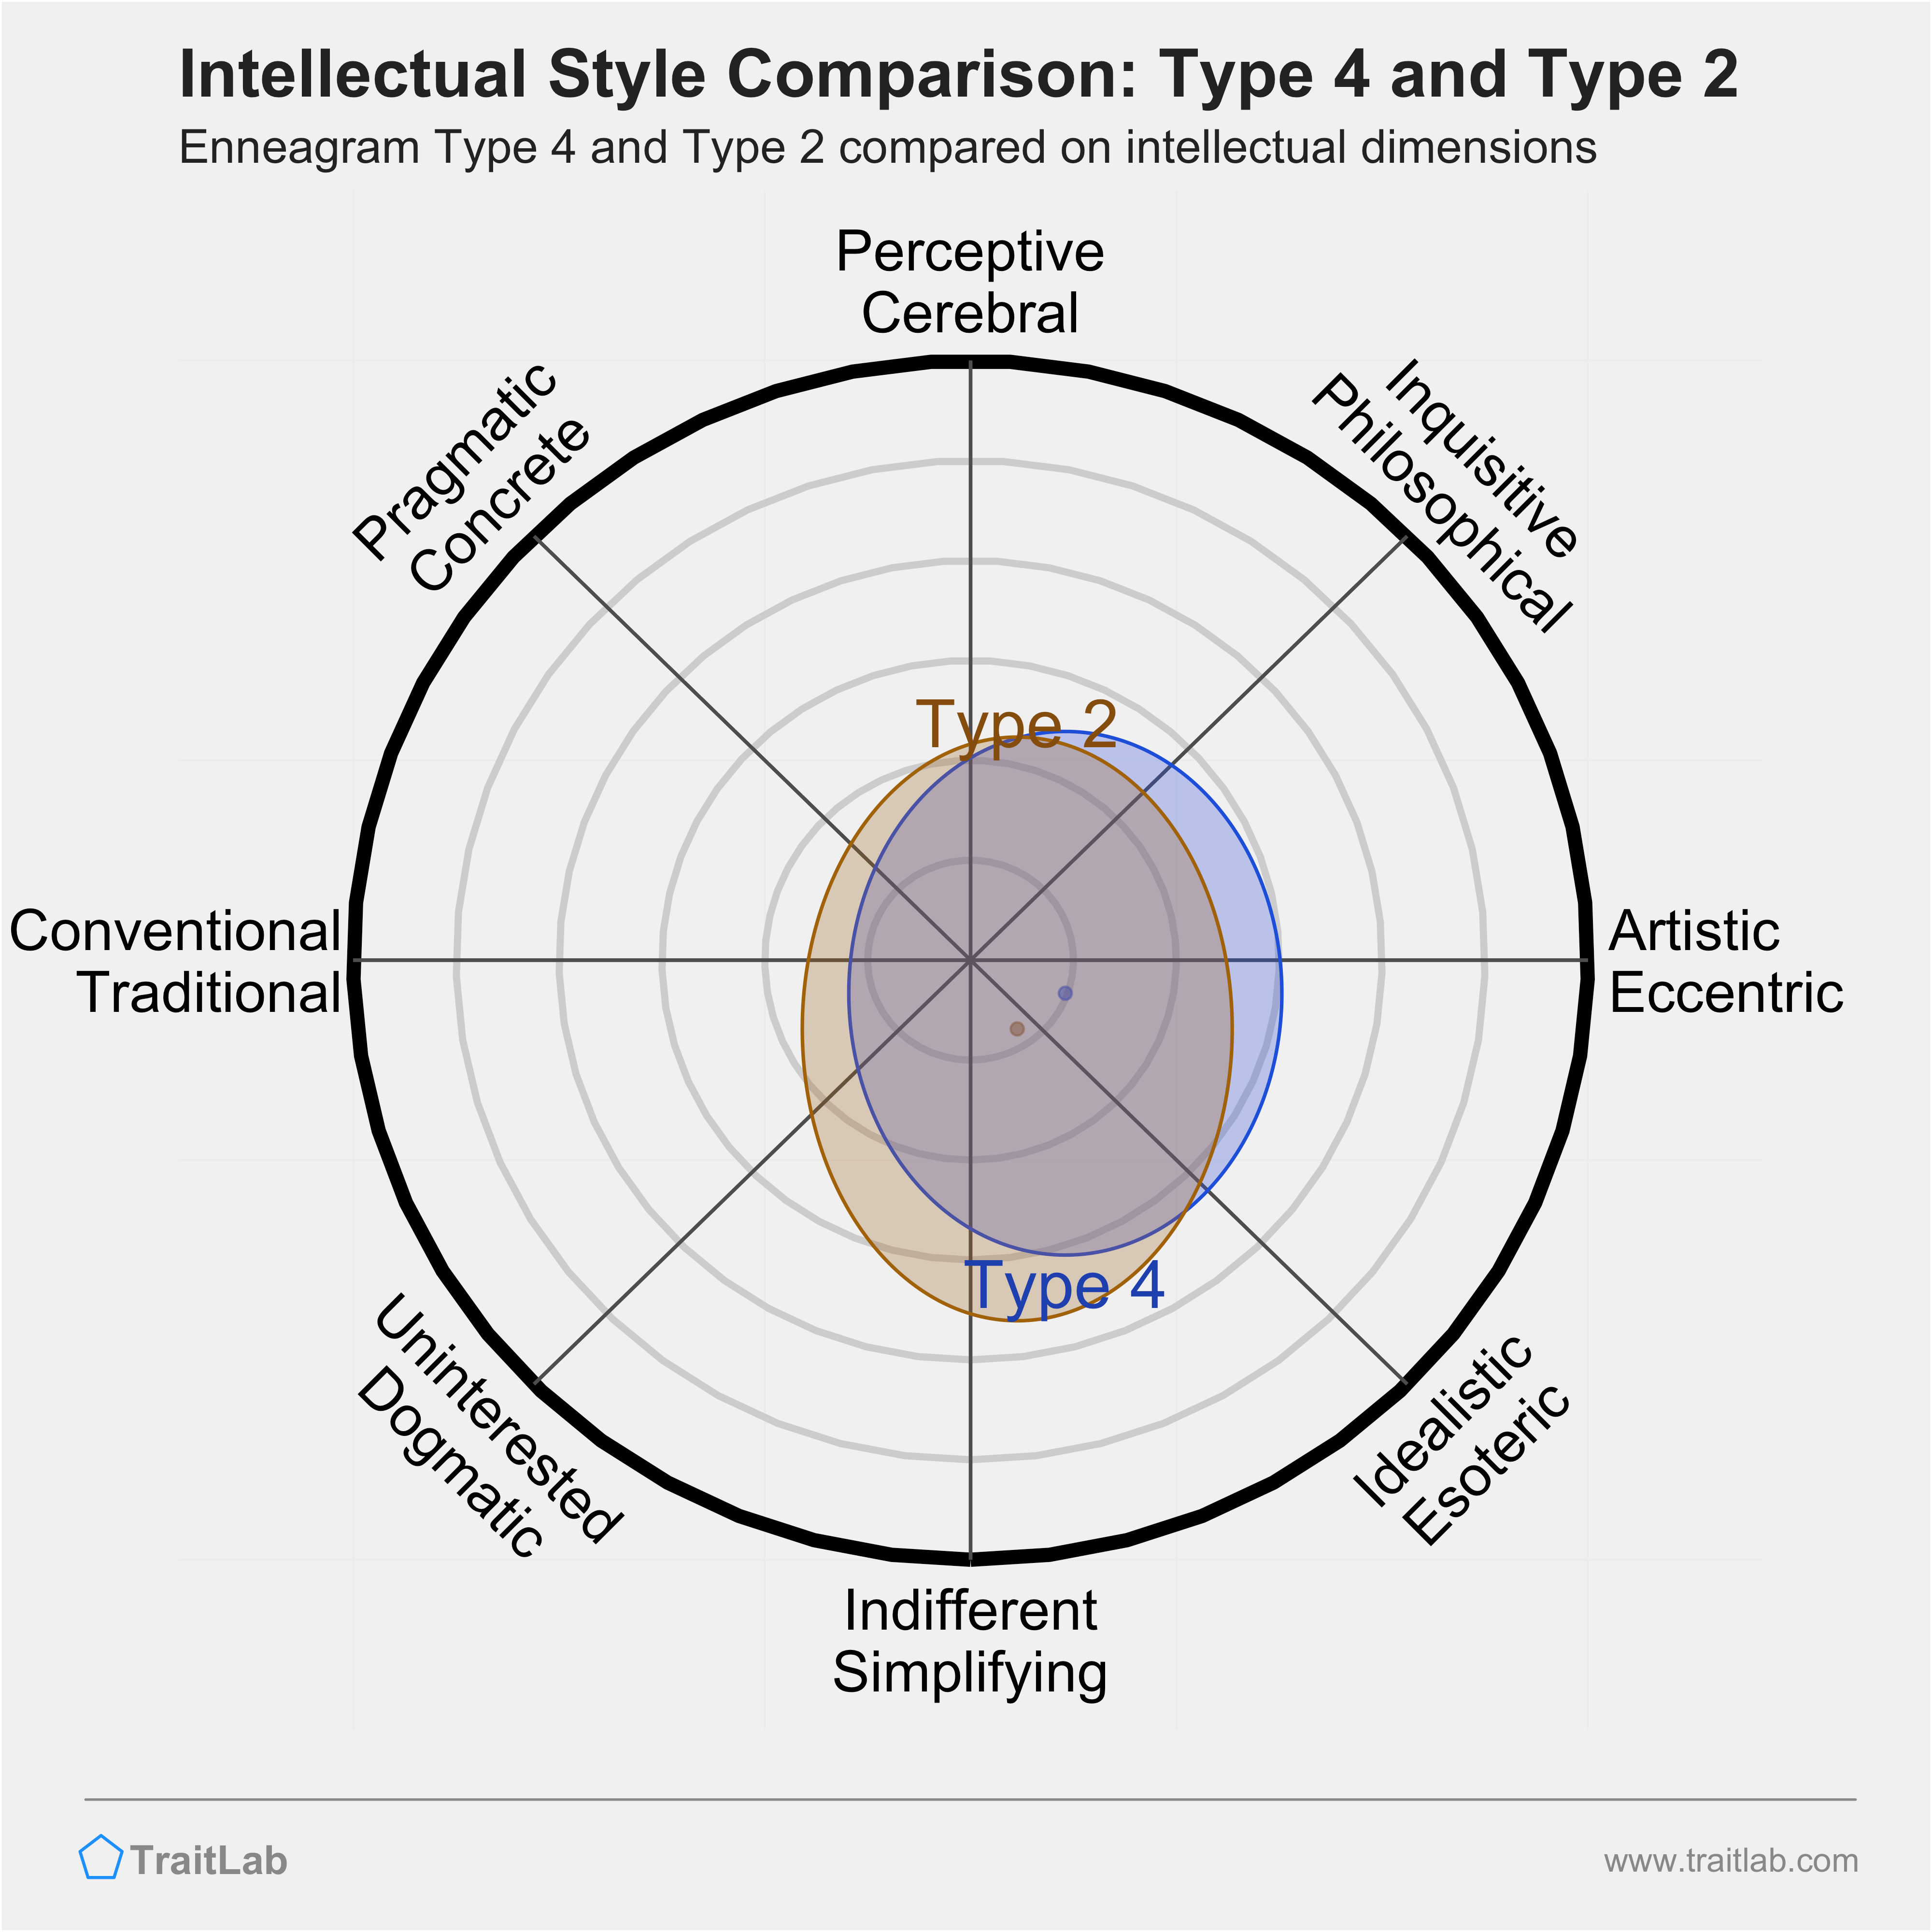 Type 4 and Type 2 comparison across intellectual dimensions